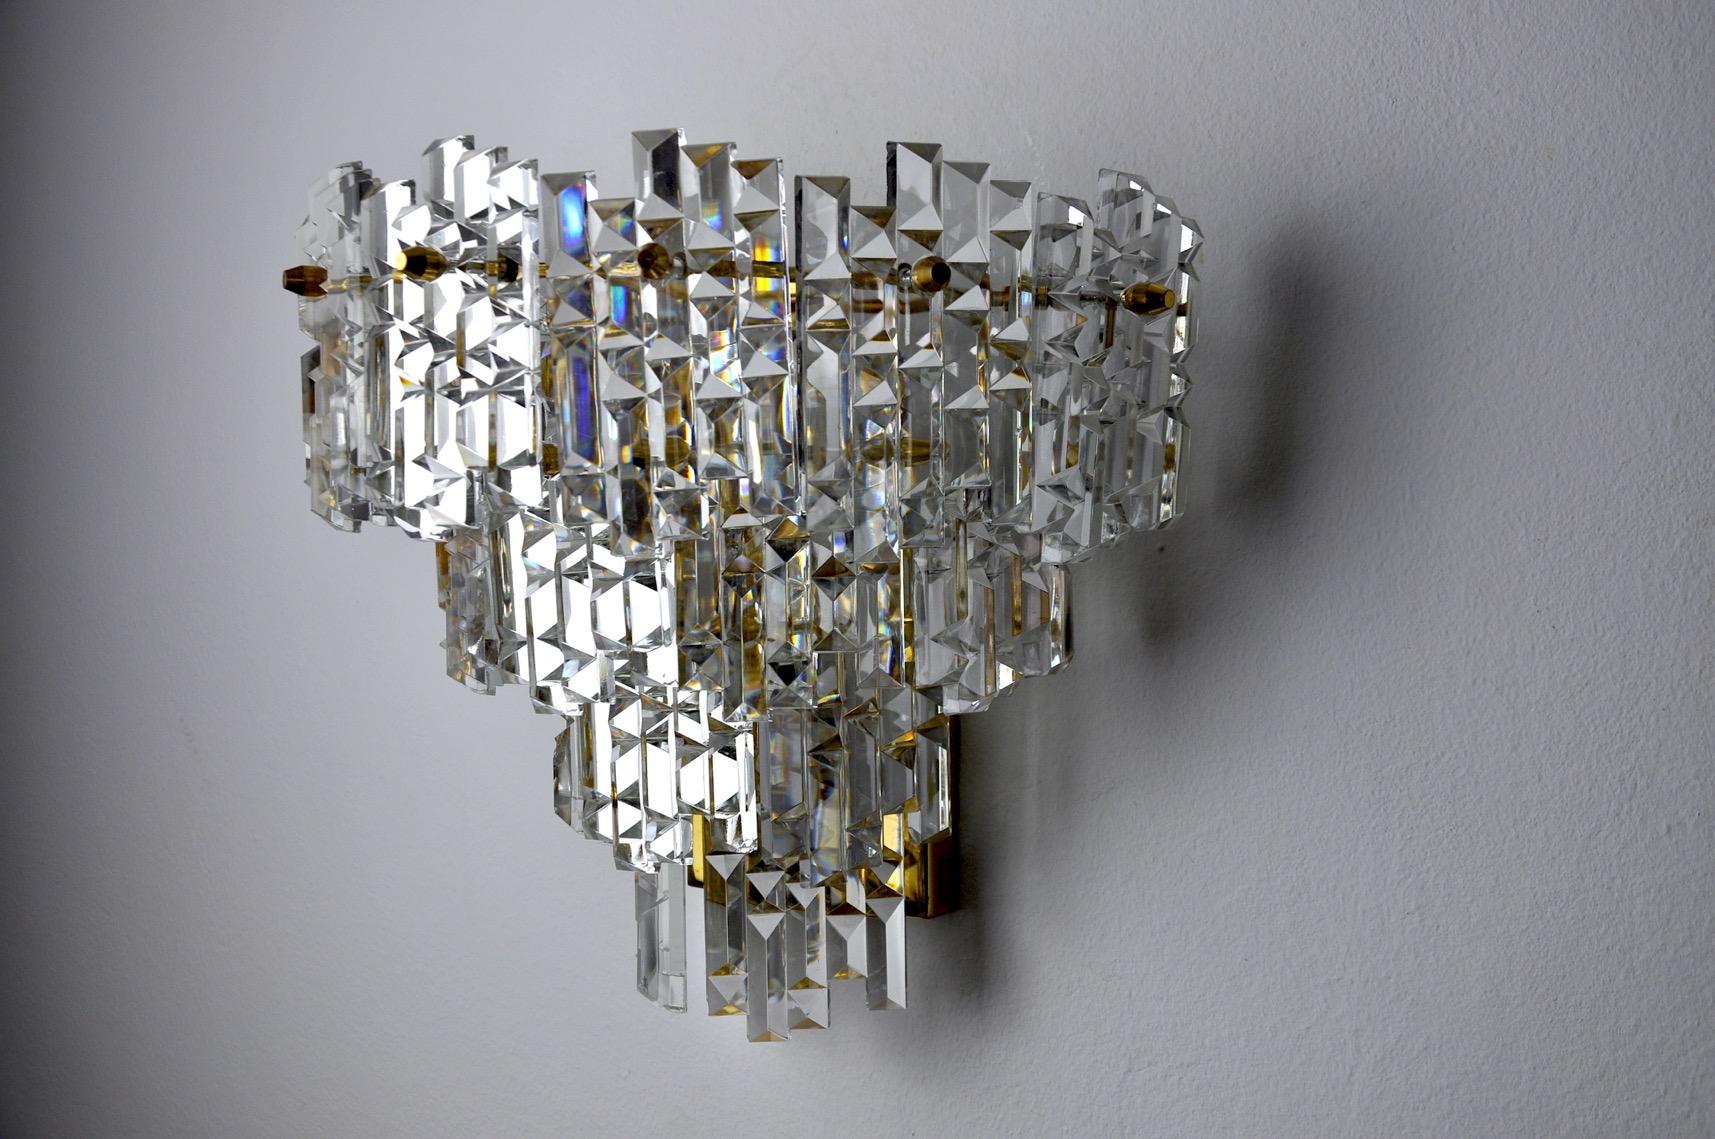 Superne and large kinkeldey wall lamp designed and produced in Germany in the 1970s. Cut crystals spread over three levels of a golden metal structure. Very beautiful design object that will illuminate your interior wonderfully. Electricity checked,